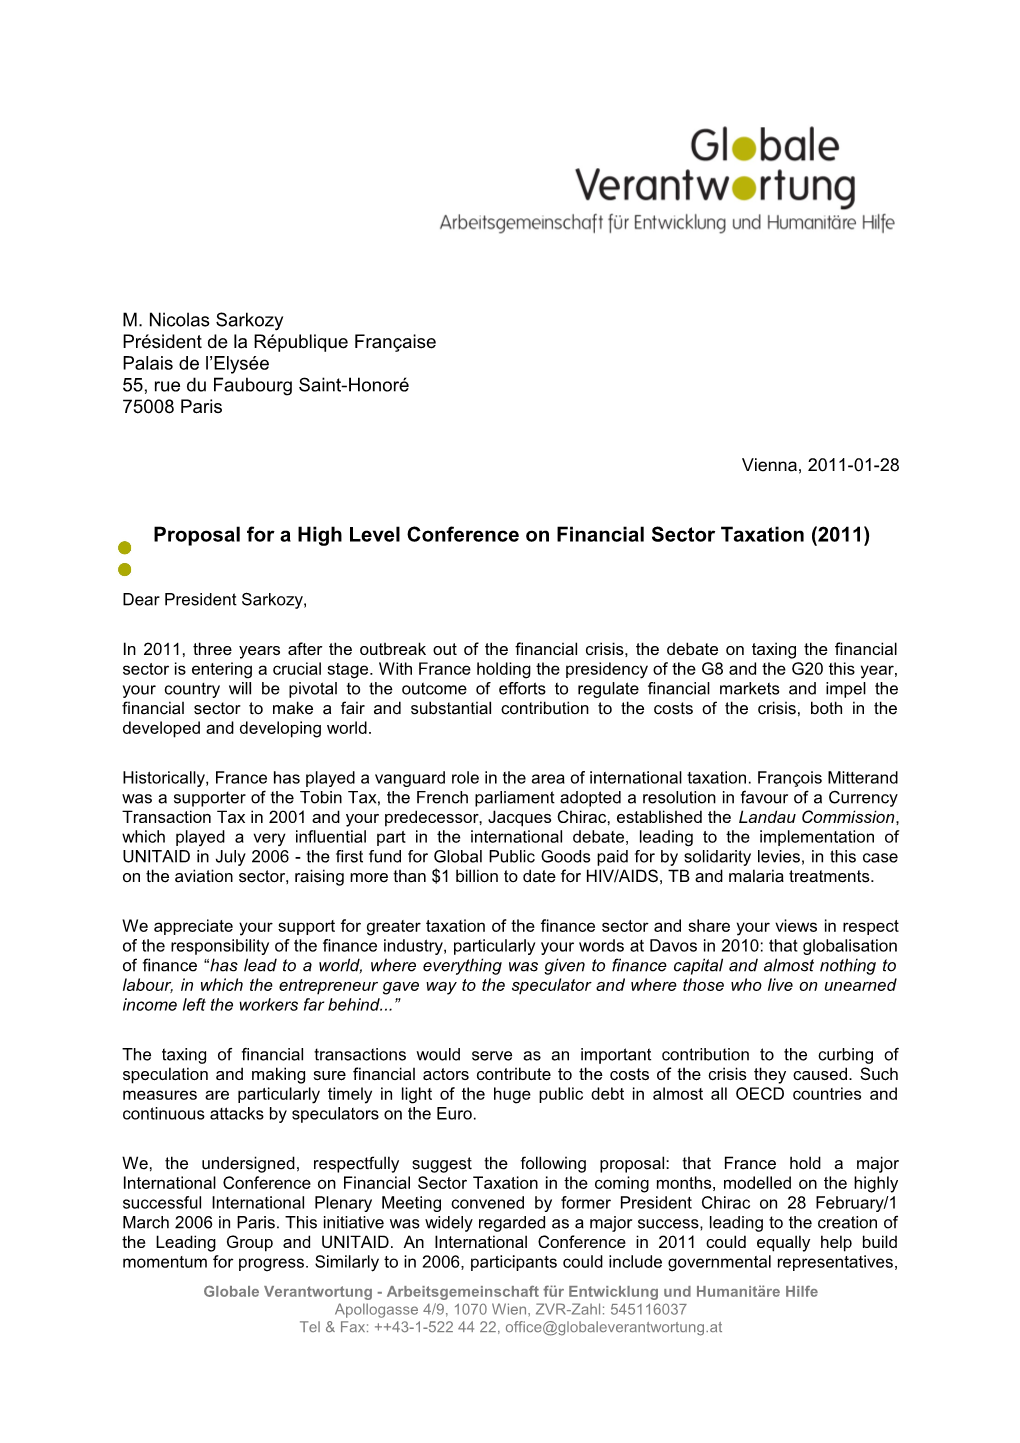 Proposal for a High Level Conference on Financial Sector Taxation (2011)